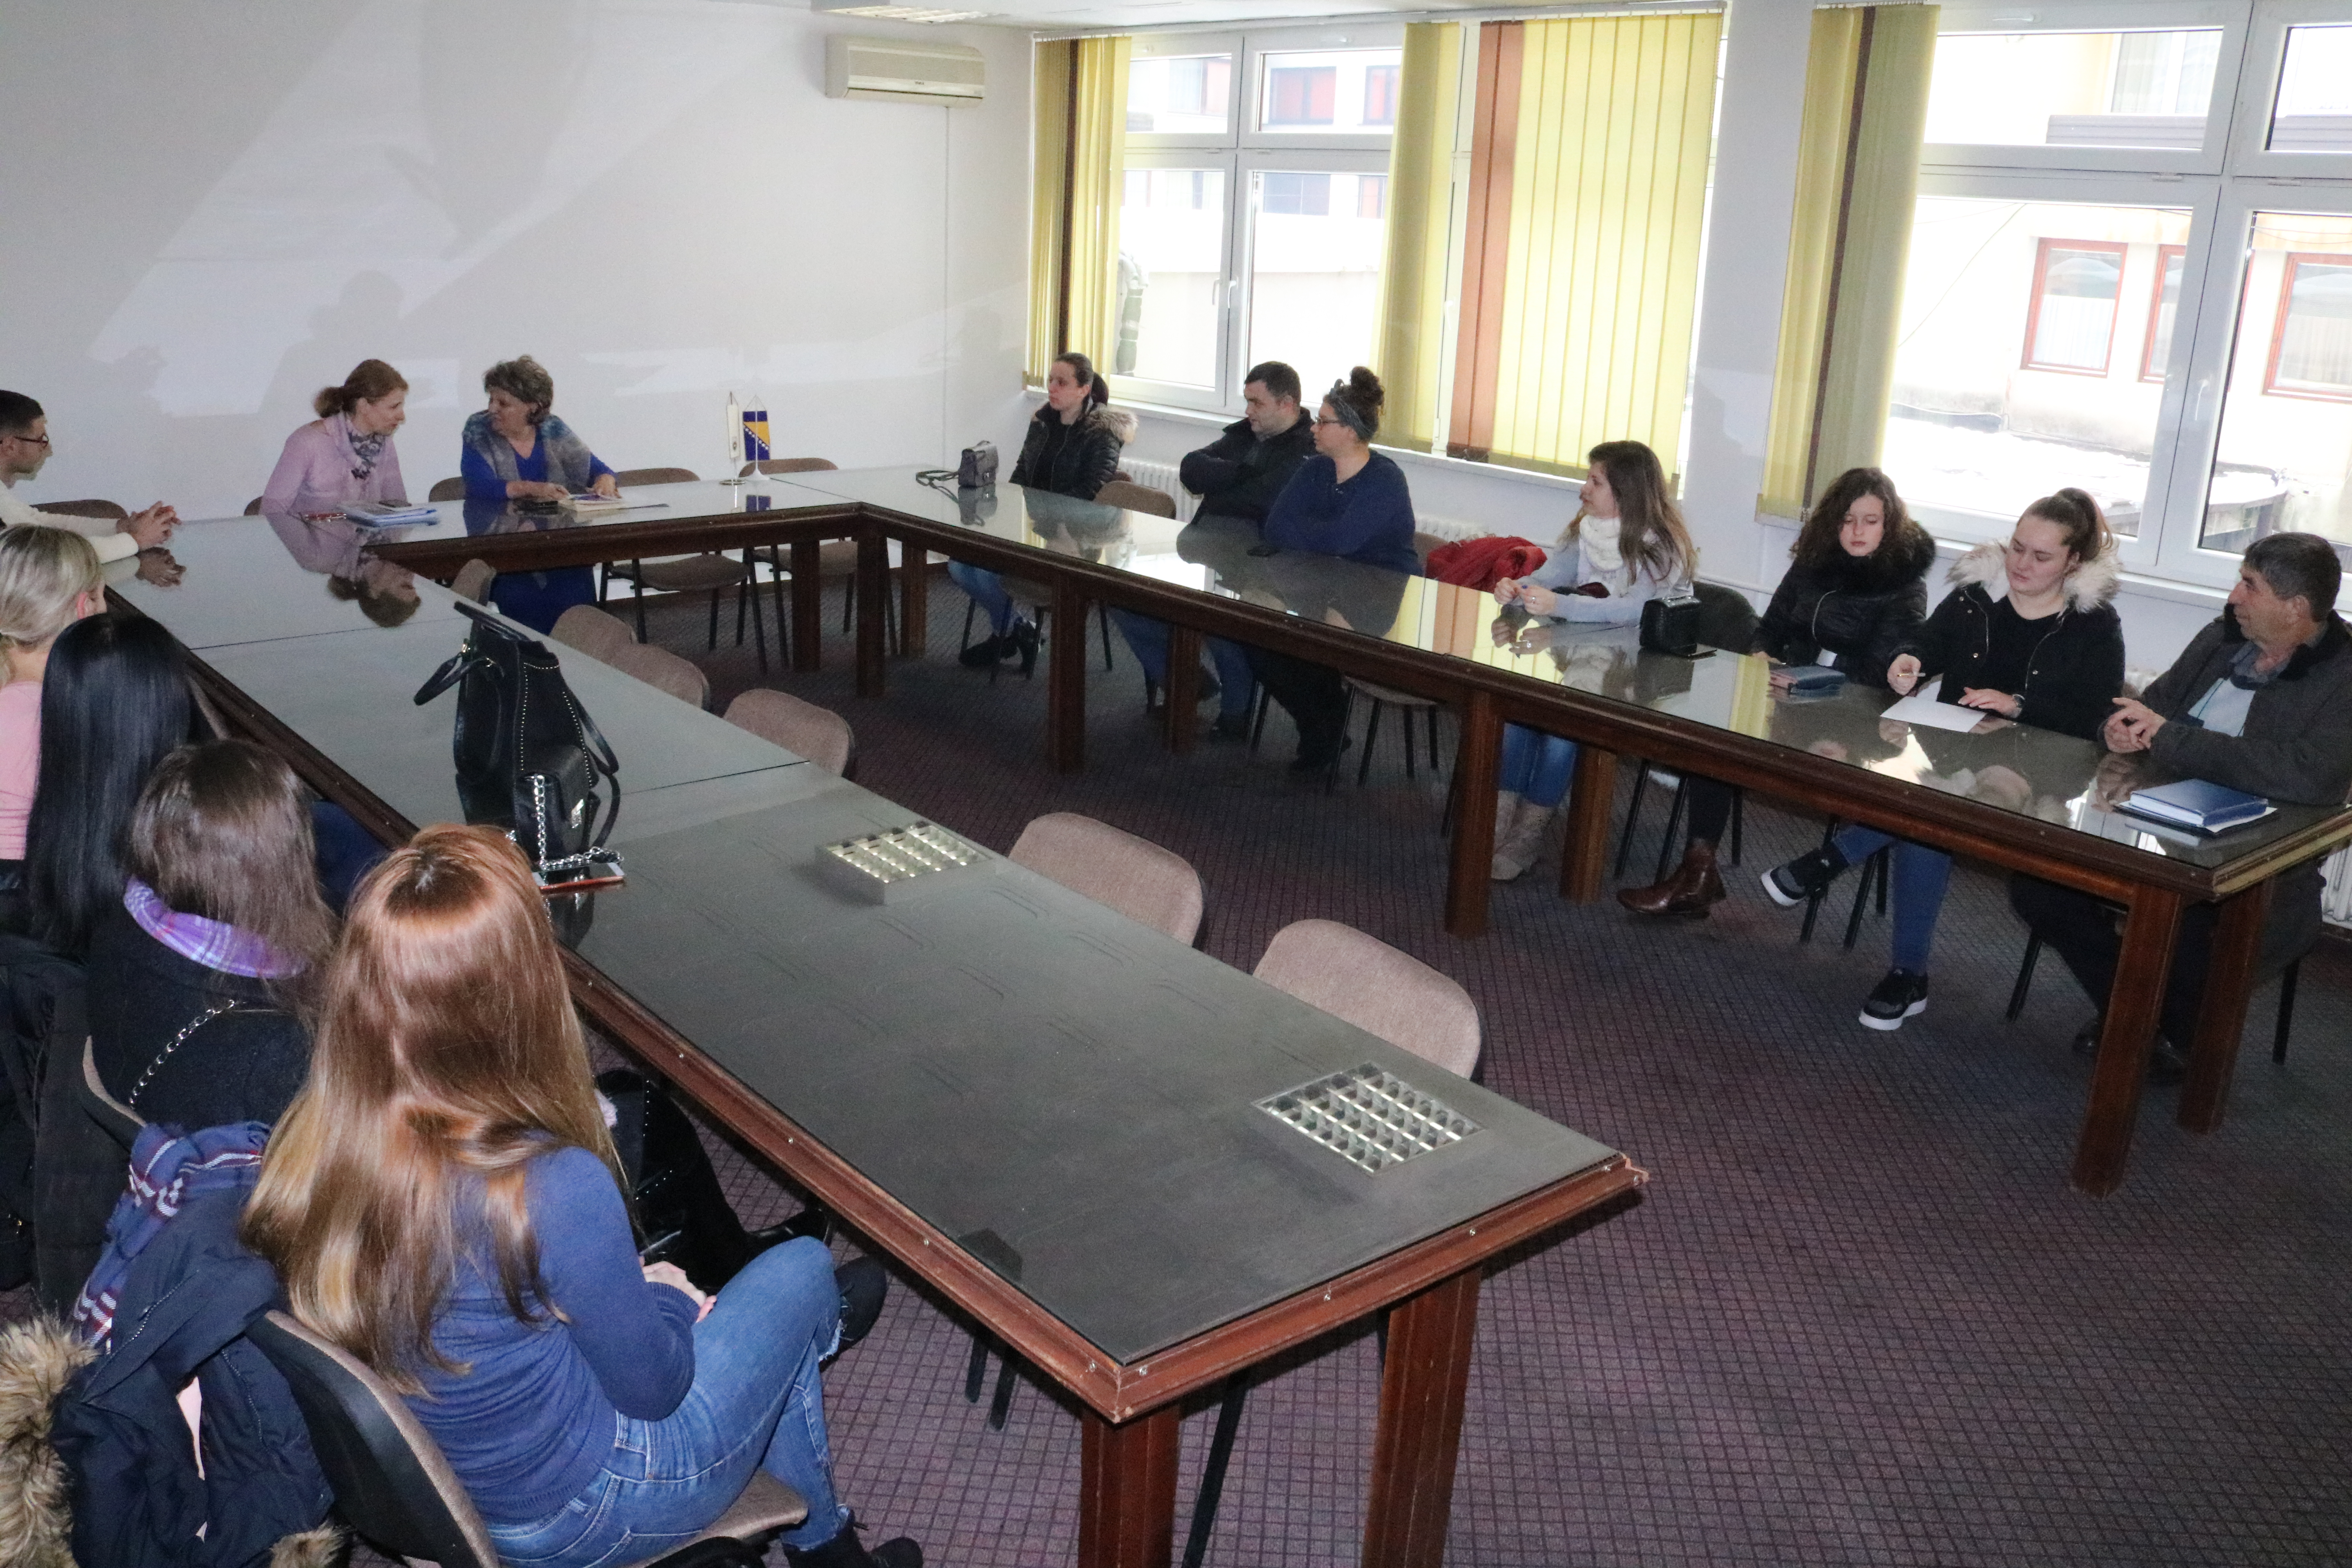 Students Of The Faculty Of Law Visited The Travnik Municipality